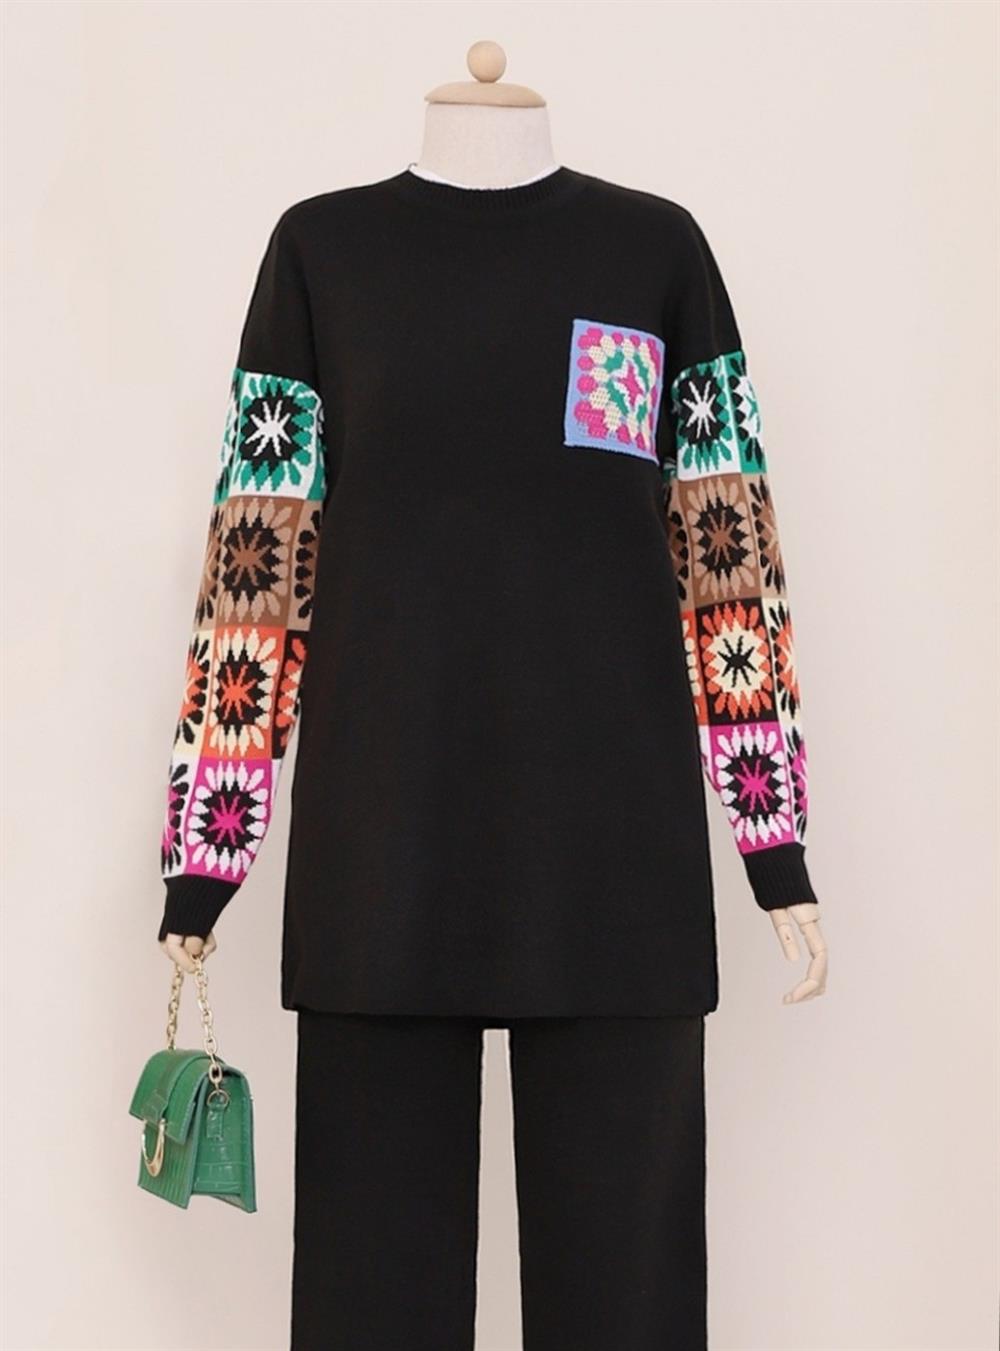 arm and Its Patterned Traditional Winter Knitwear Suit -Black